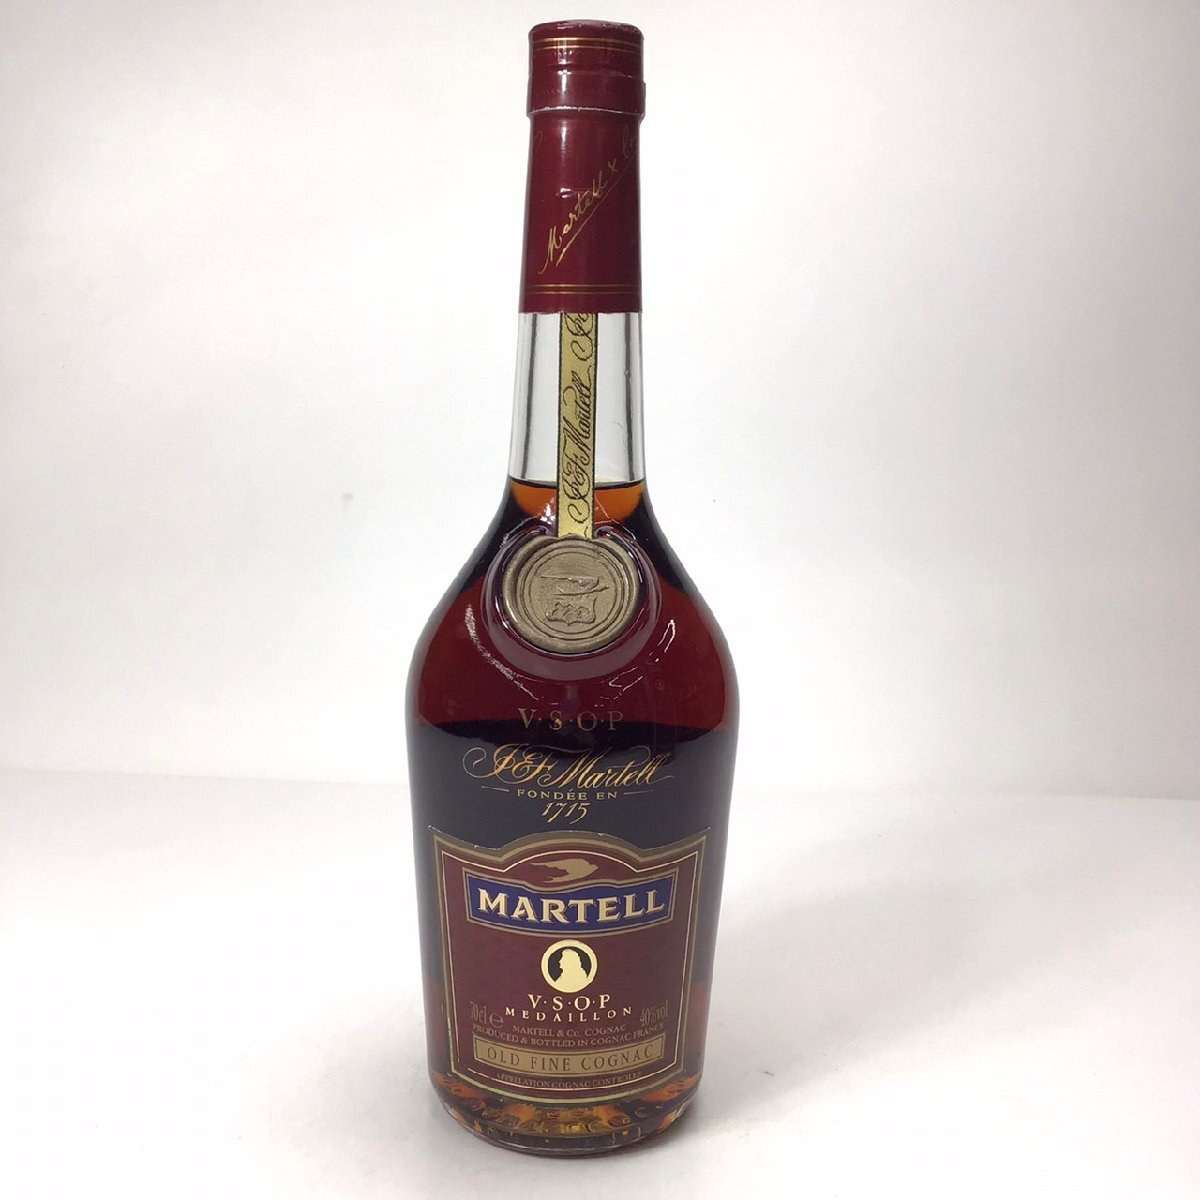  not yet . plug Martell VSOPme large yon red label box attaching 700ml 40% 2B-9-2-151752-A